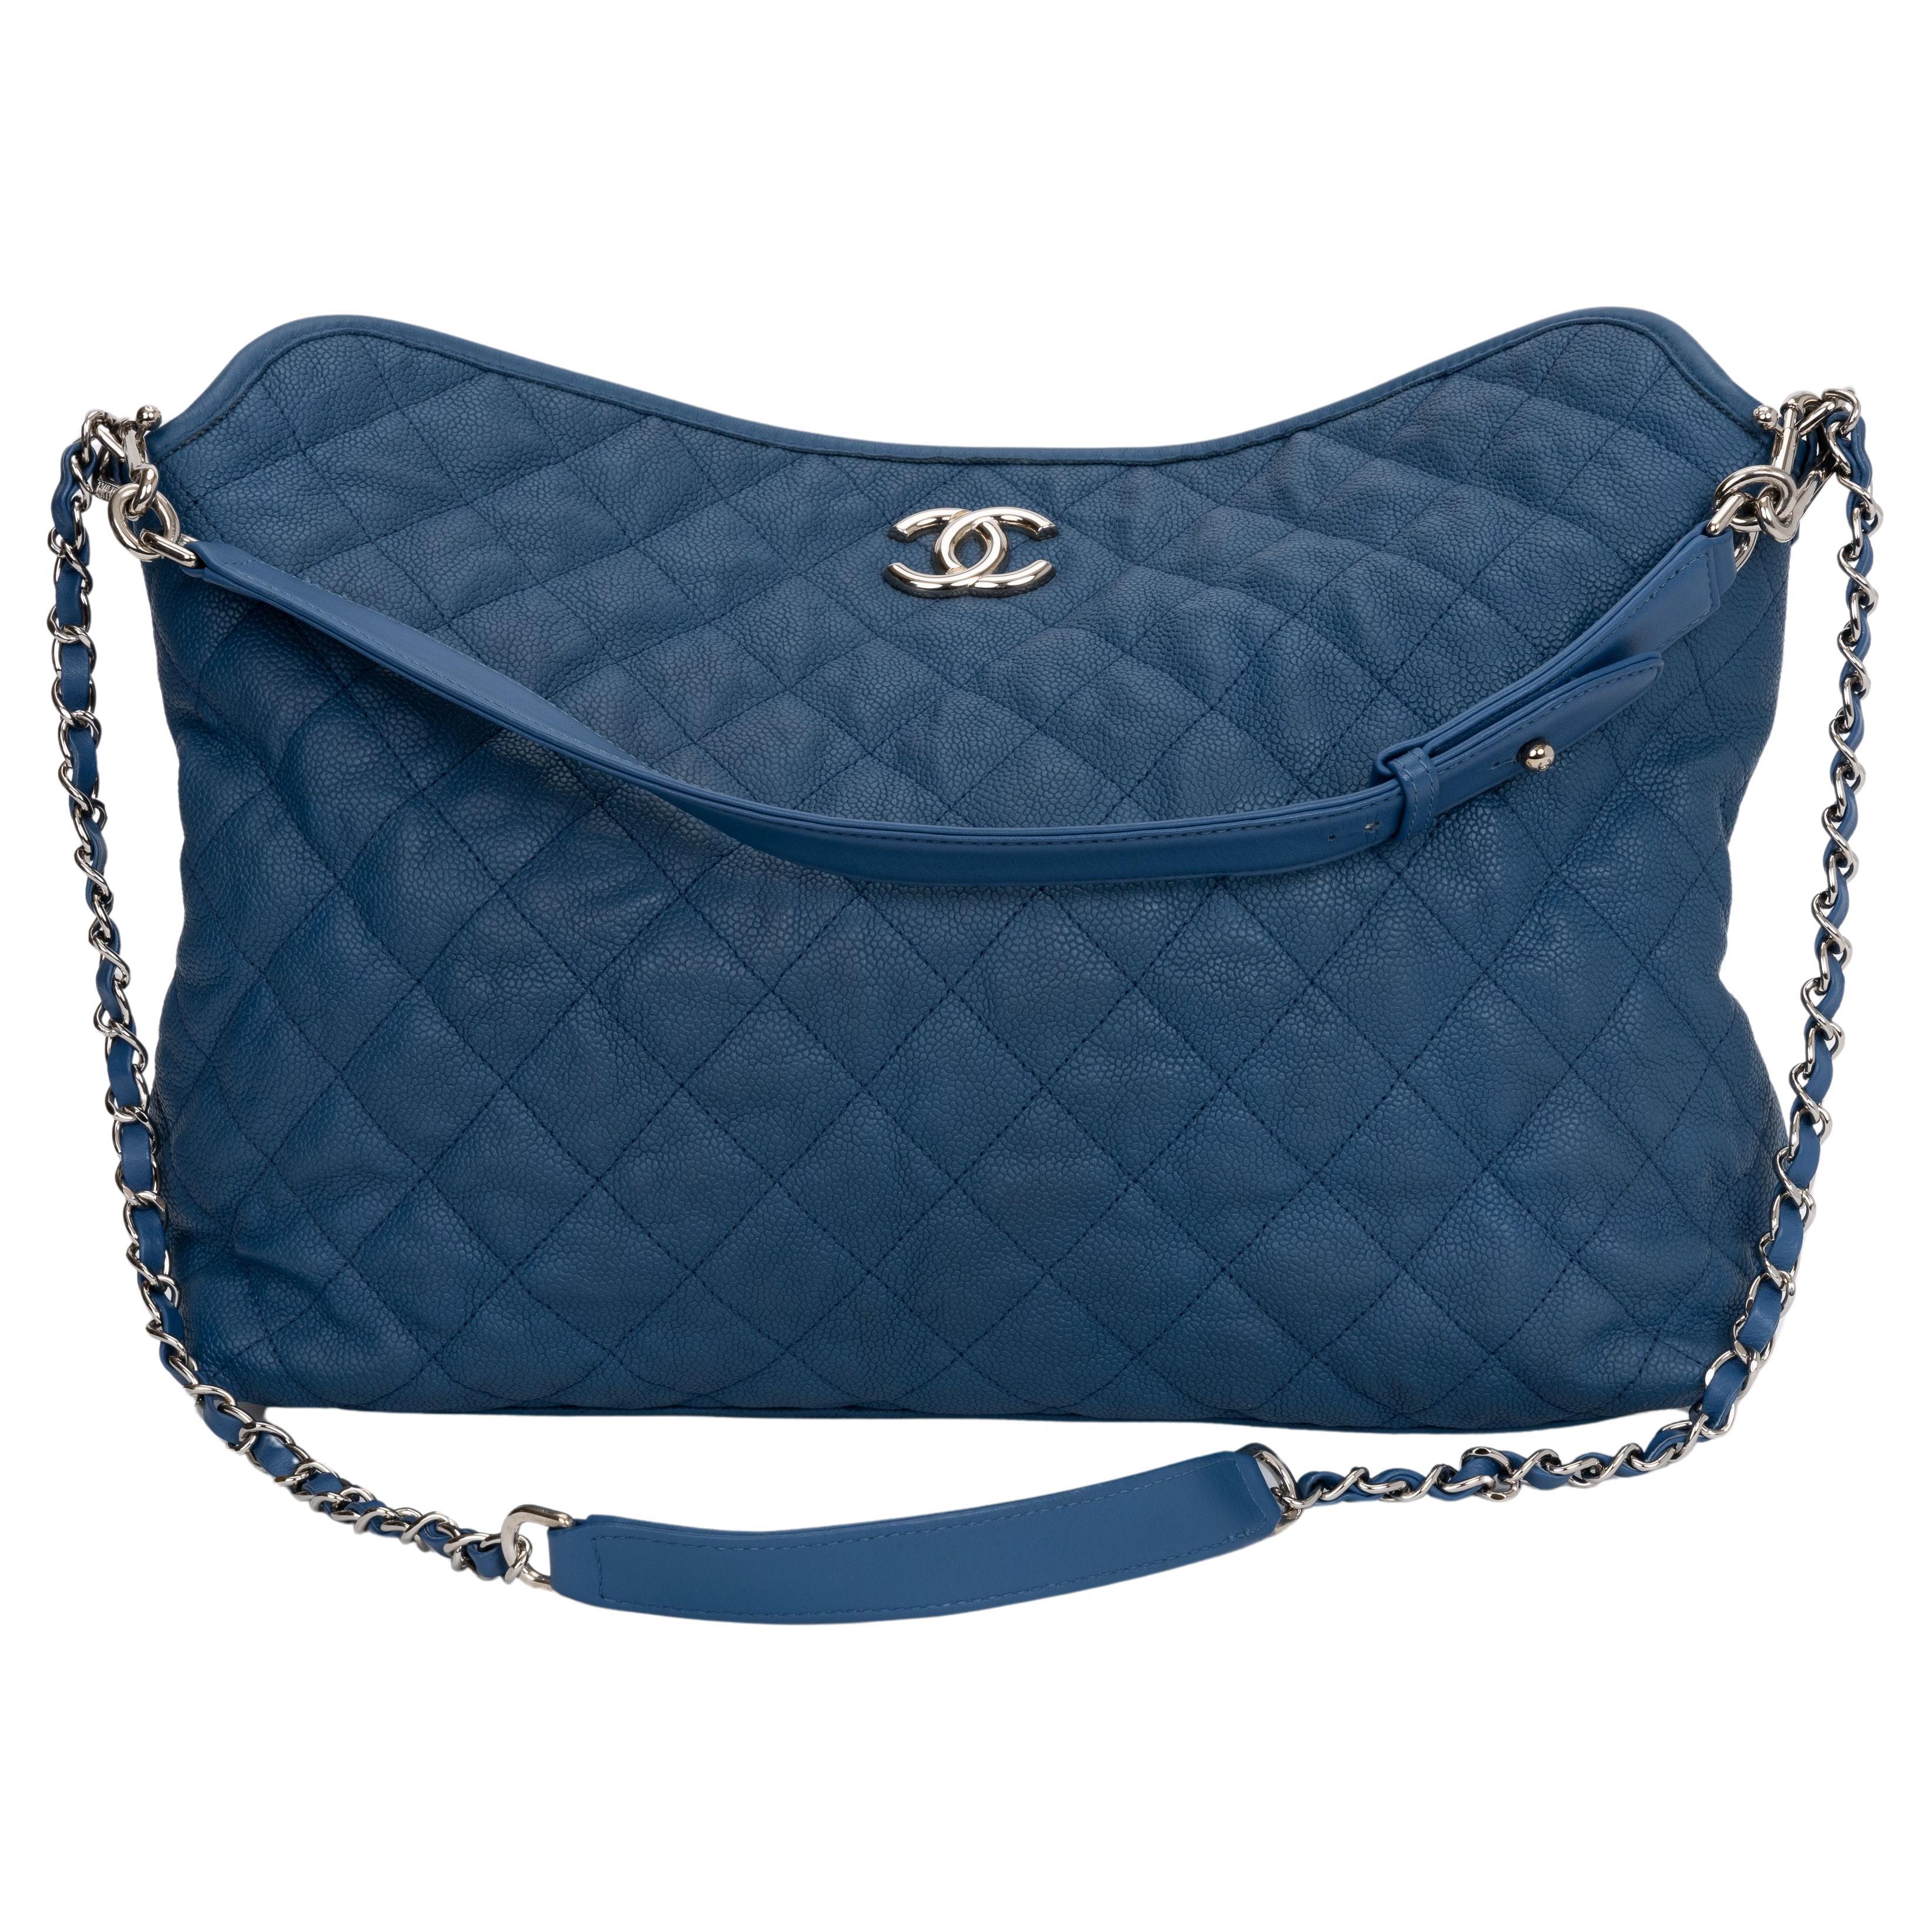 Chanel Denim Blue French Riviera Hobo For Sale